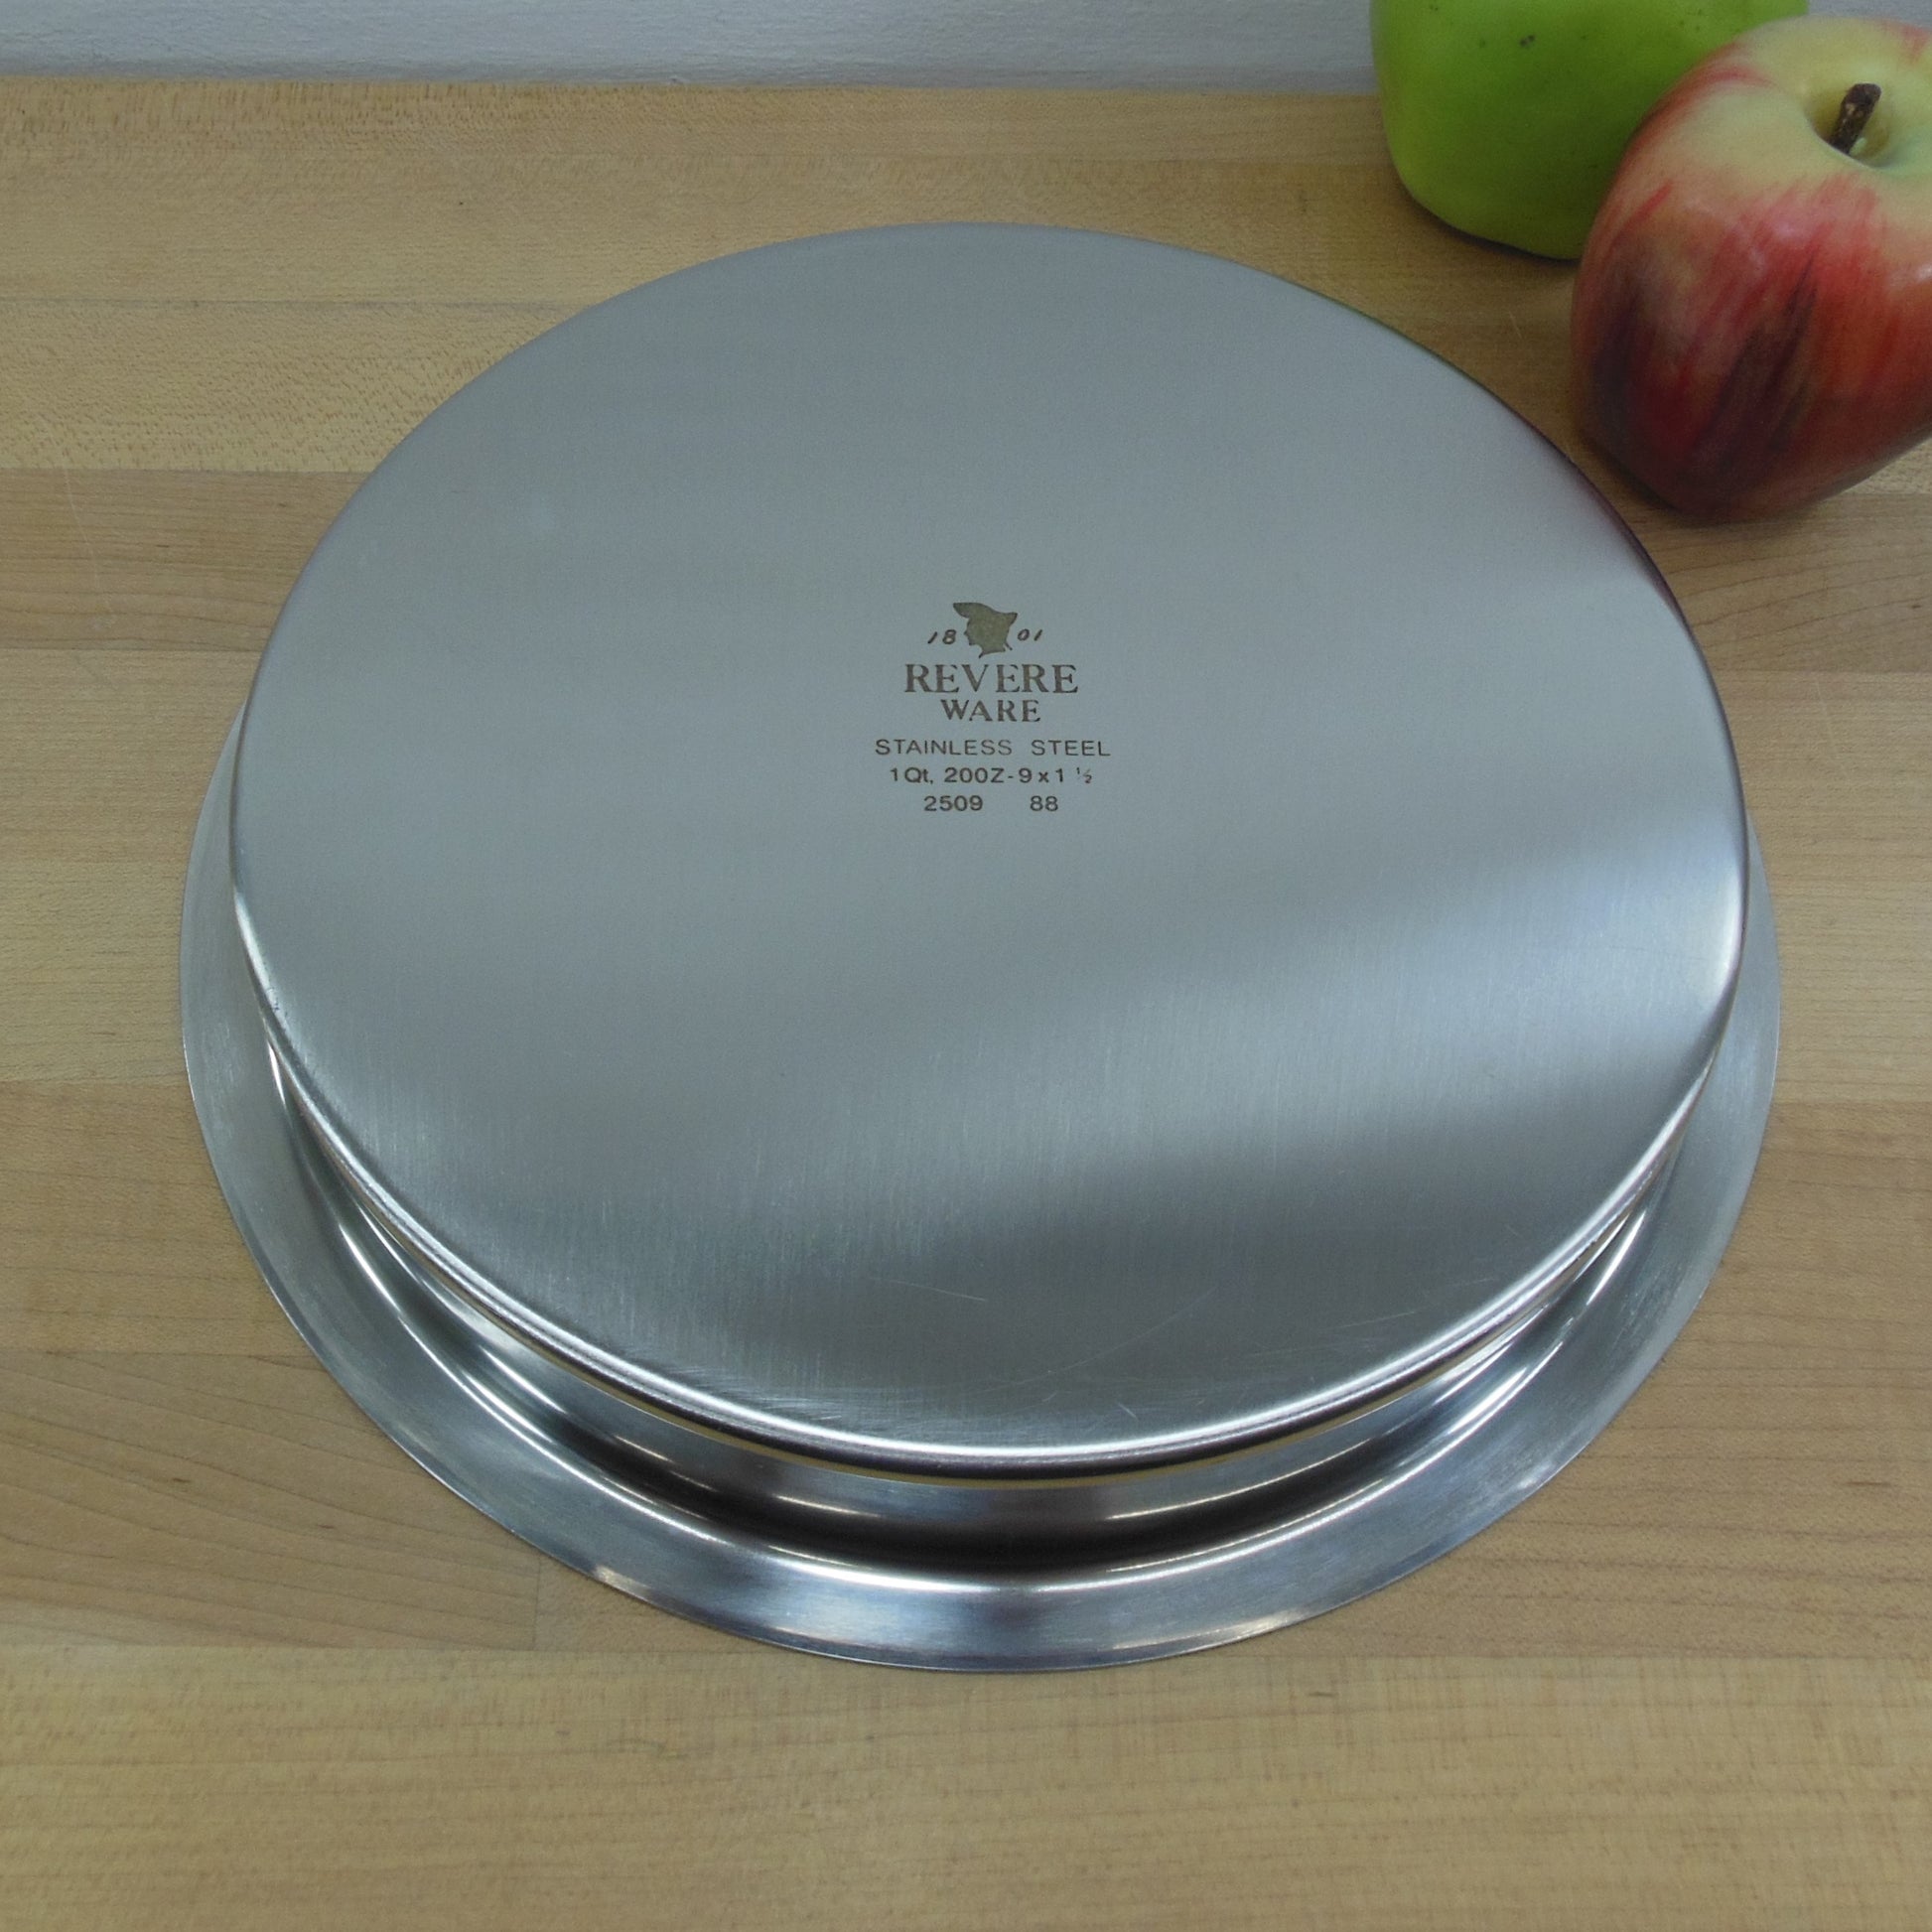 Cooperhead Collection Round Cake Pan 9 Inch - 1 ea